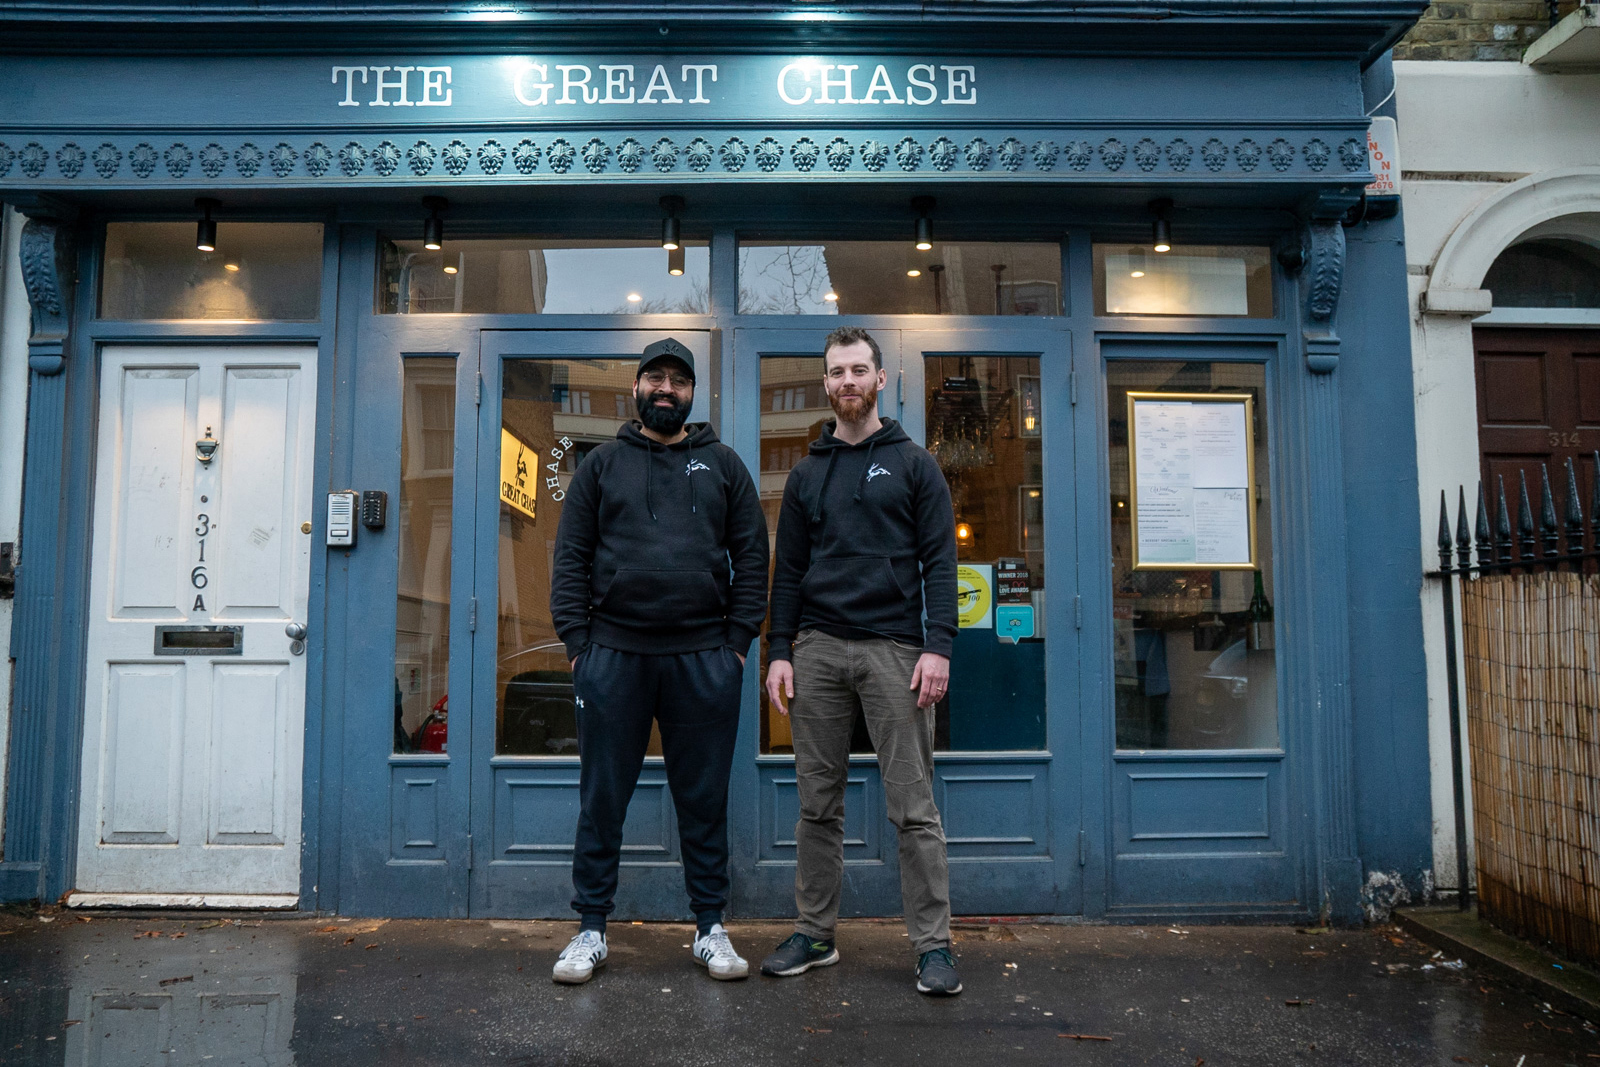 The founders of the Great Chase pose for a photo in front of their restaurant window.